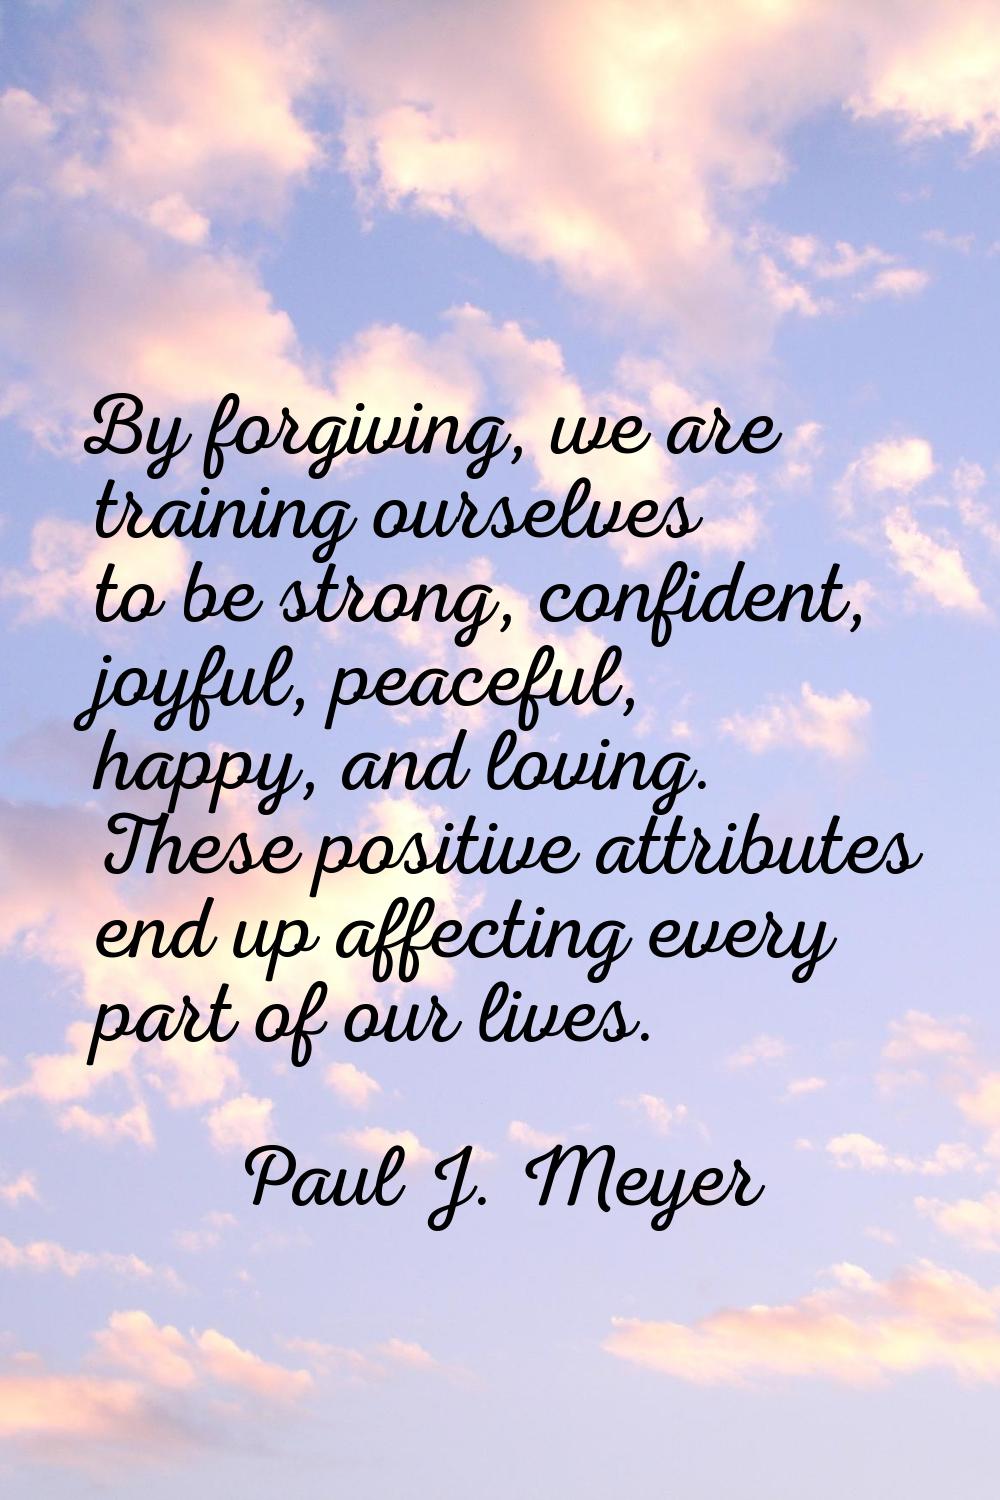 By forgiving, we are training ourselves to be strong, confident, joyful, peaceful, happy, and lovin